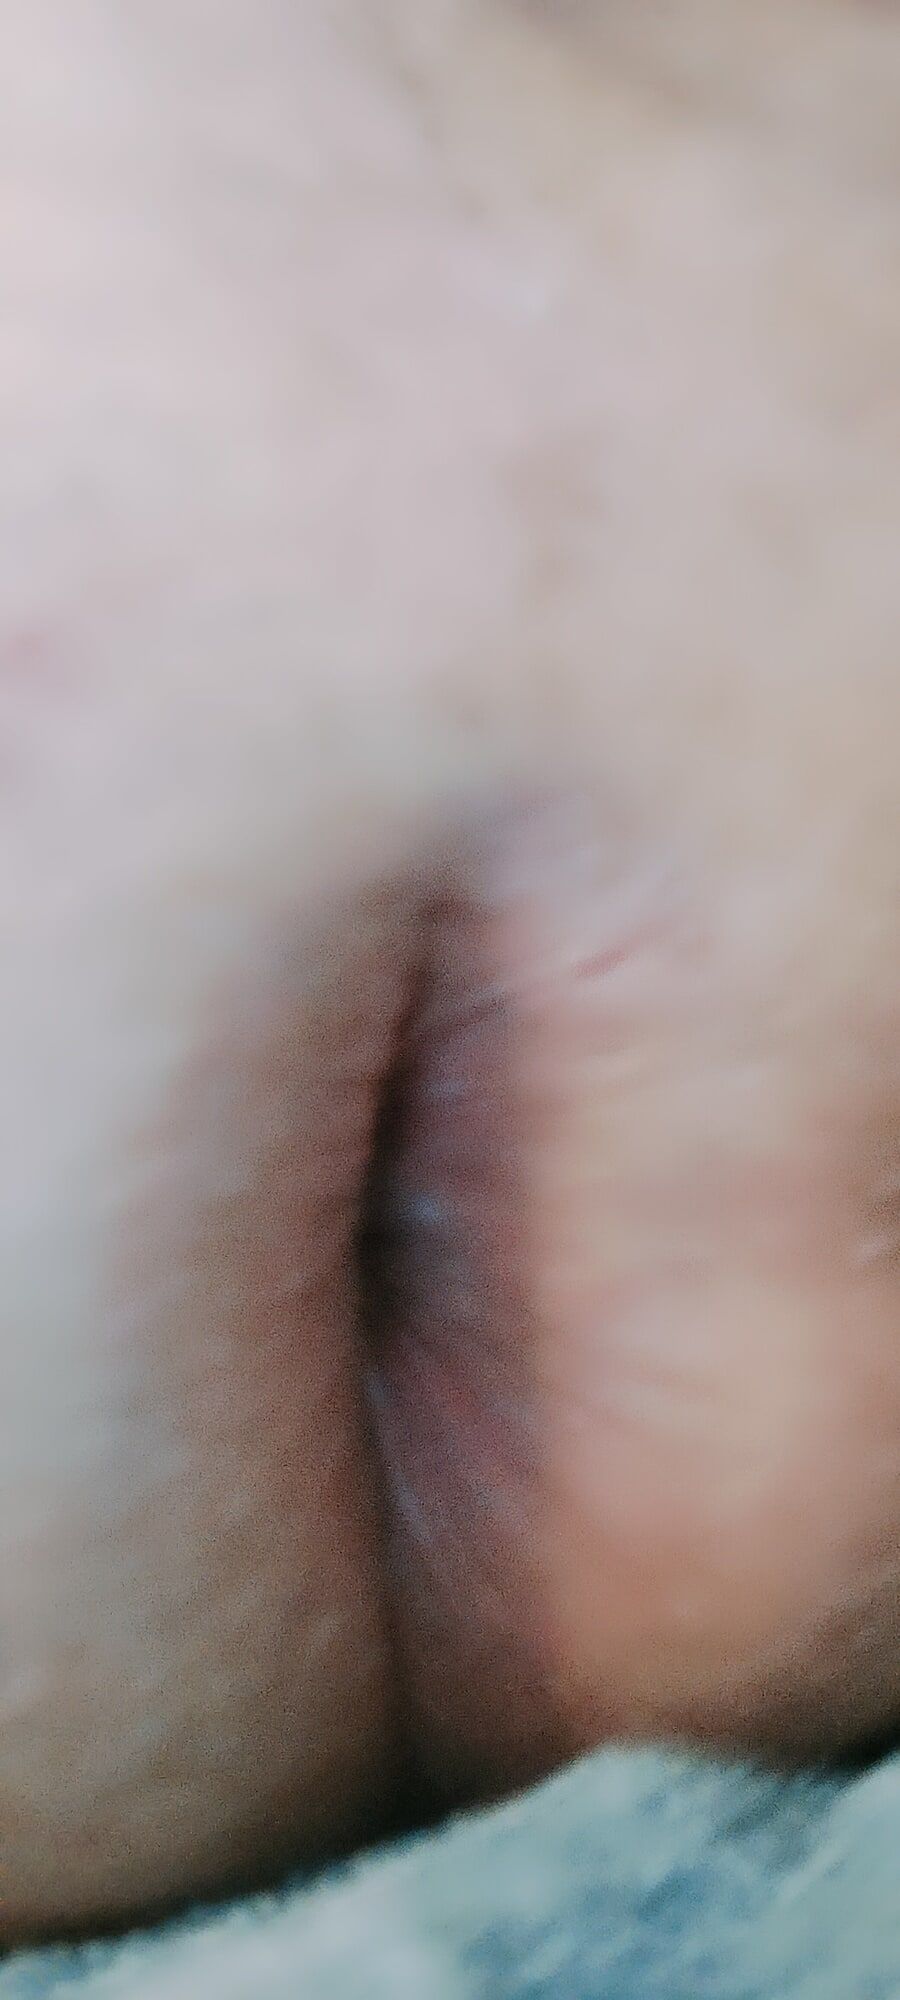 My ass has toys and my cock  #30